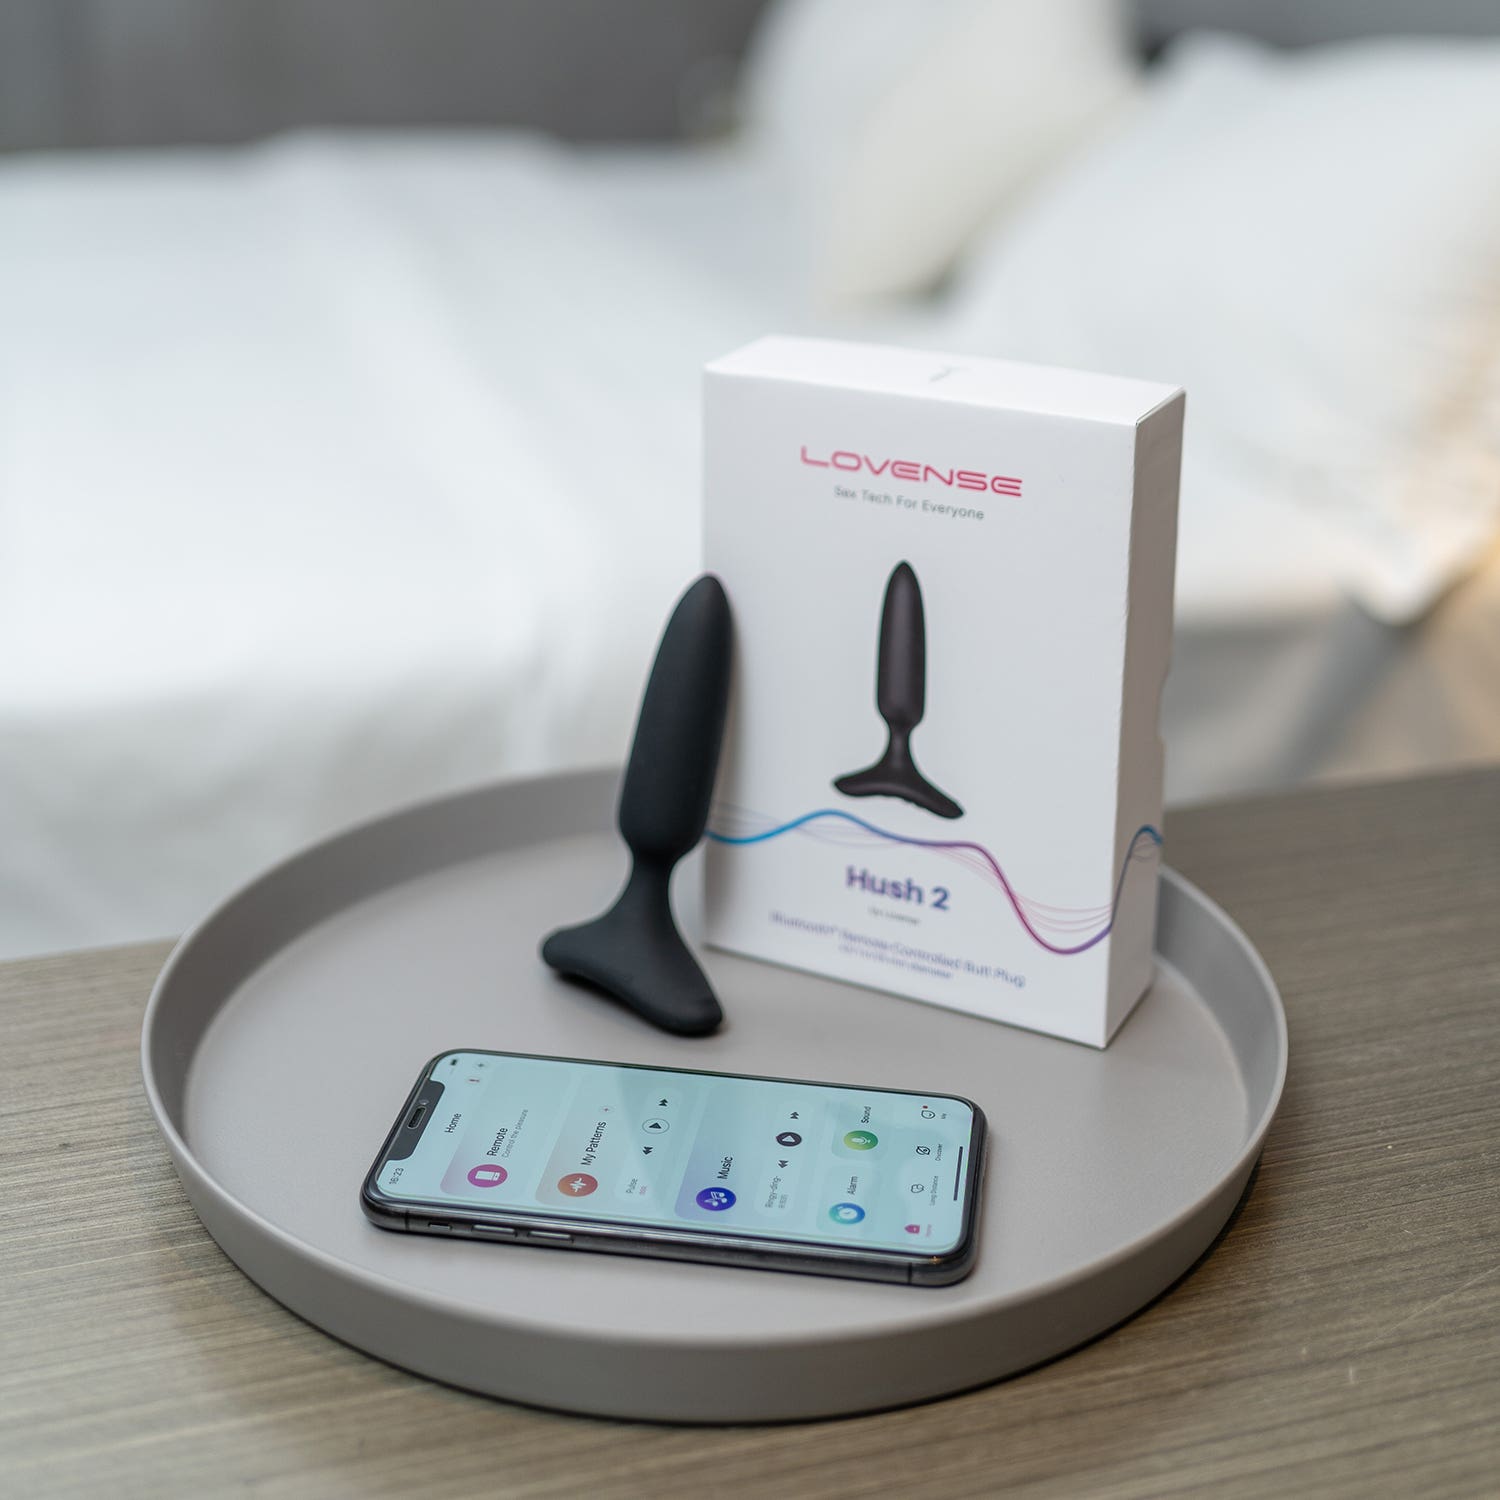 Lovense Hush 2 (1 in) - Bluetooth Remote-Controlled Butt Plug